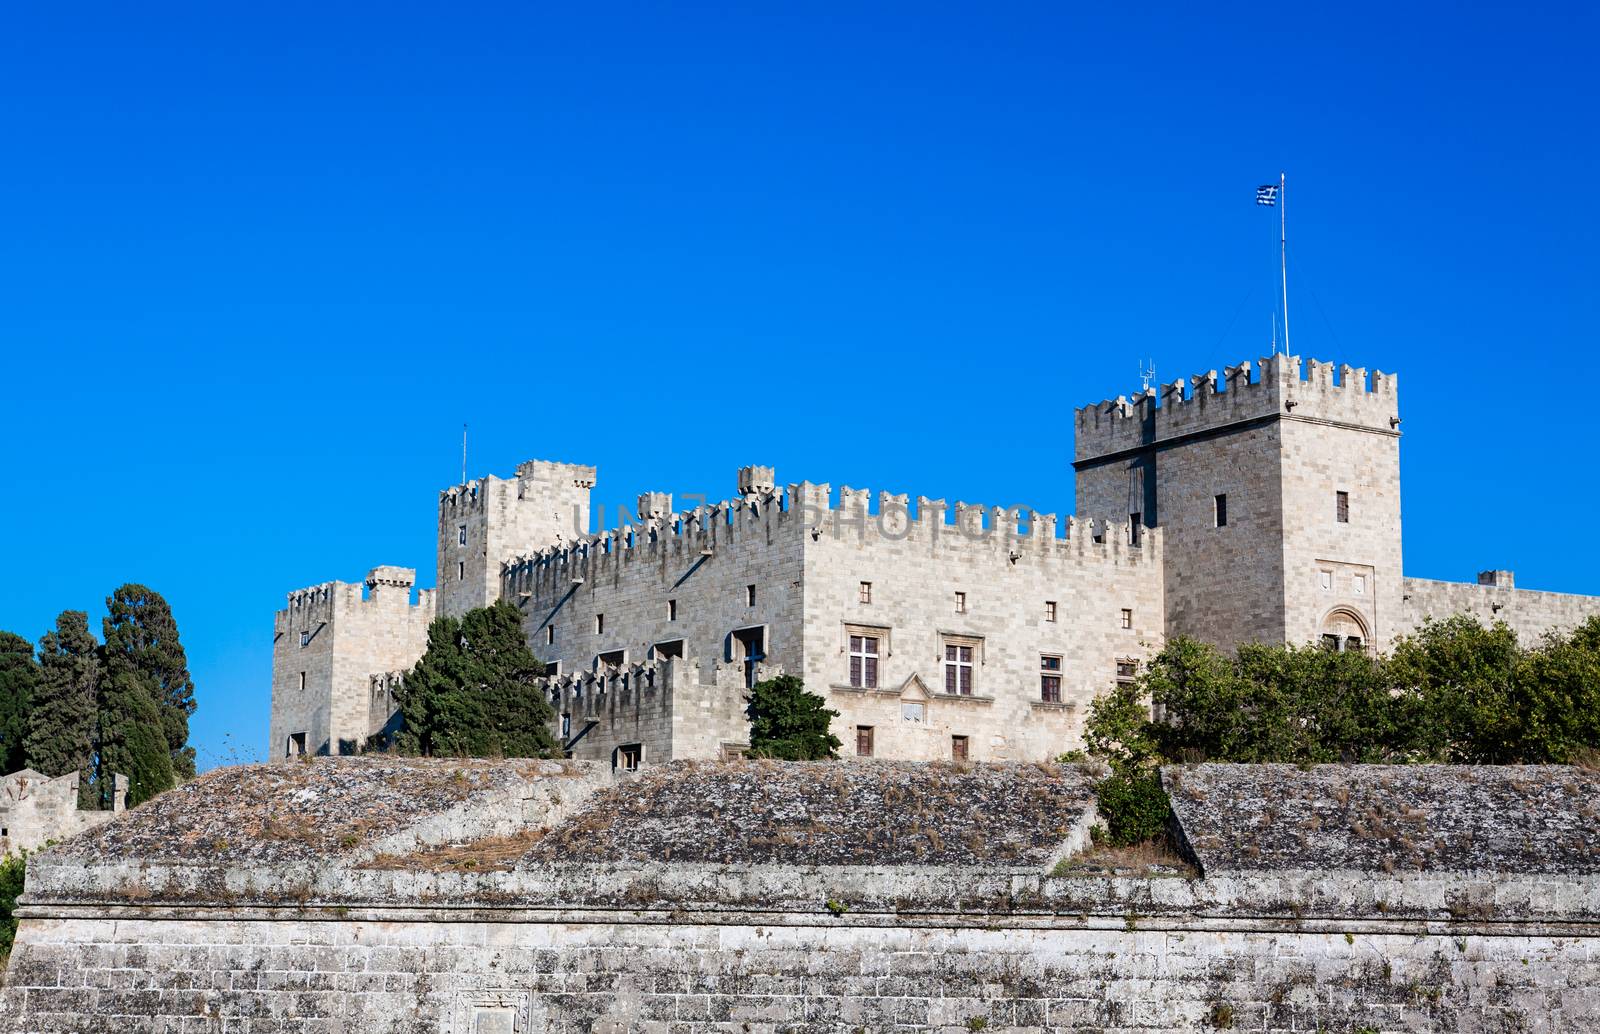 Famous Knights Grand Master Palace (also known as Castello) in the Medieval town of Rhode Island in Greece. Must-visit museum of Rhodes.